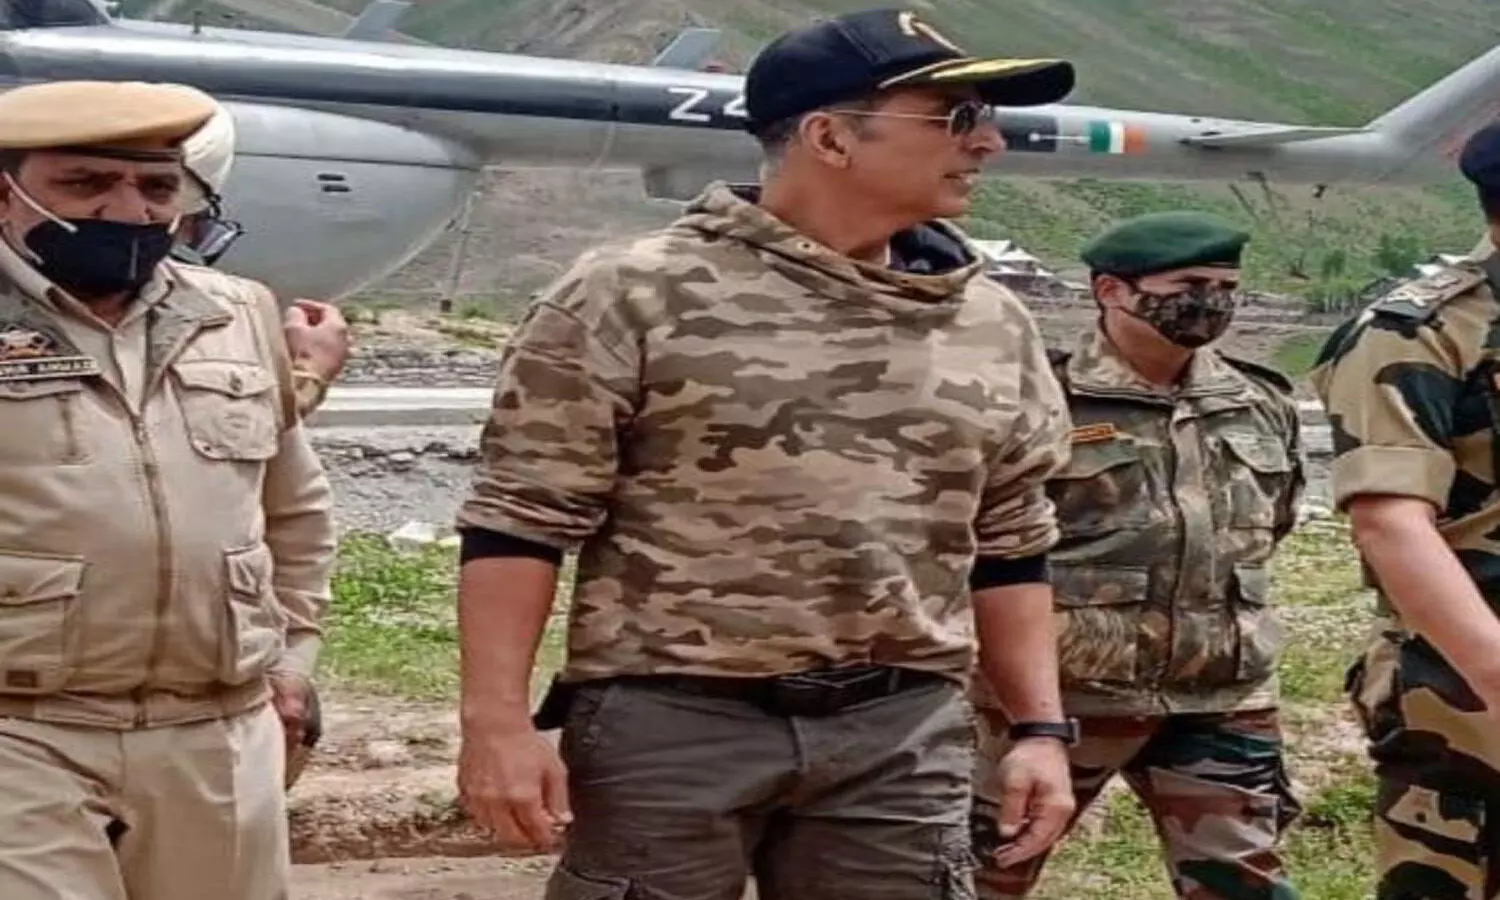 Akshay Kumar meet and interact with BSF jawans at the Tulail Valley in Kashmir